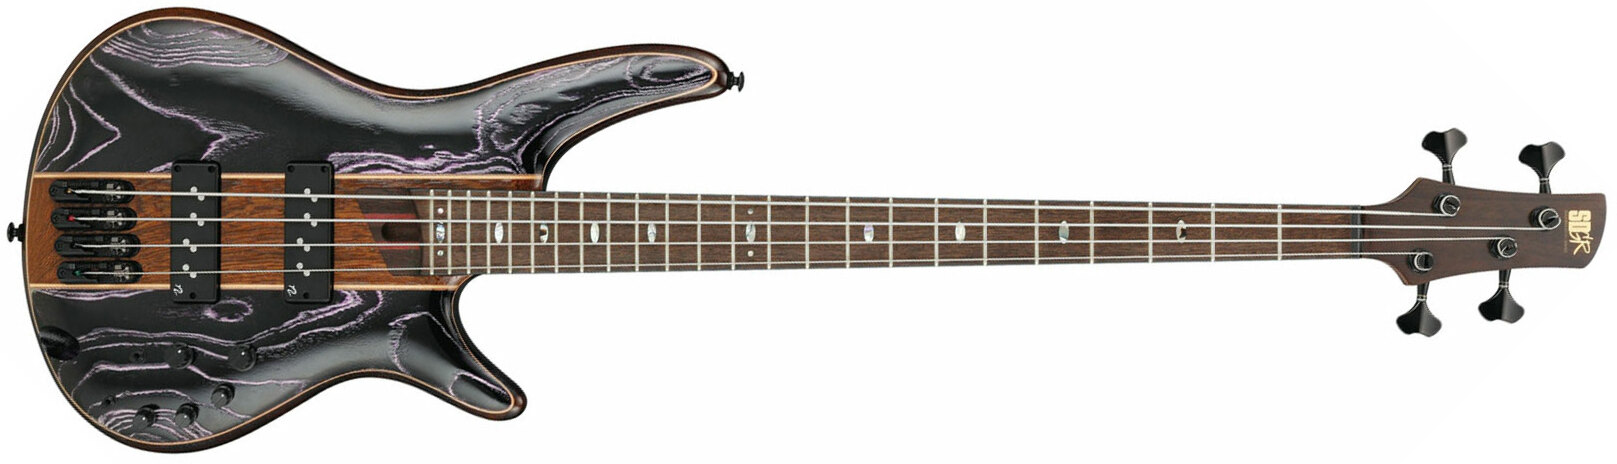 Ibanez Sr1300sb Mgl Premium Active Pp - Magic Wave Low Gloss - Solid body electric bass - Main picture